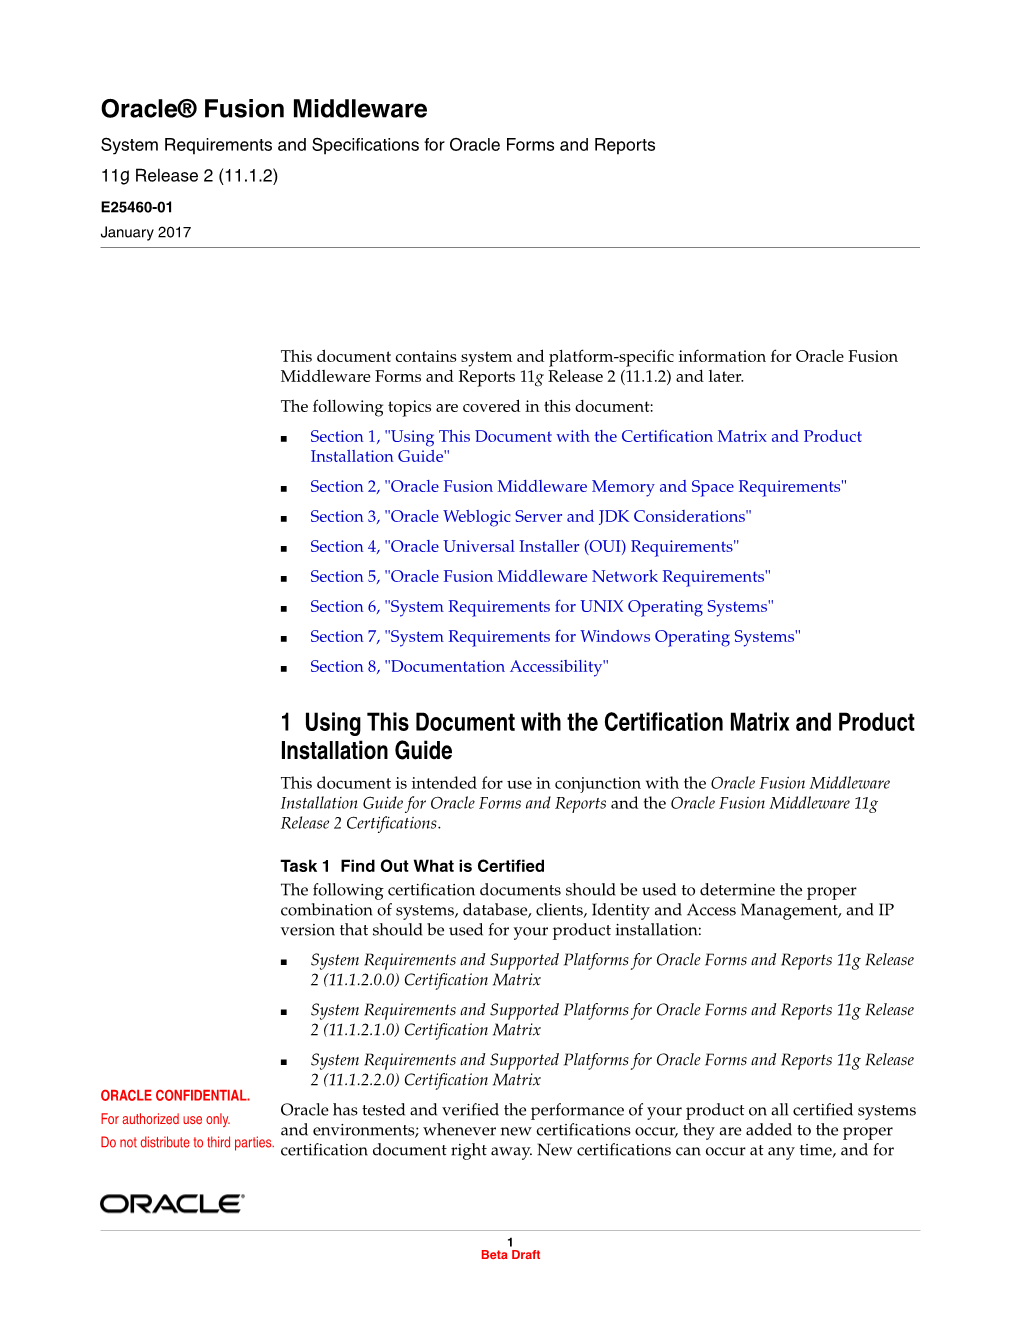 Oracle® Fusion Middleware 1 Using This Document with the Certification